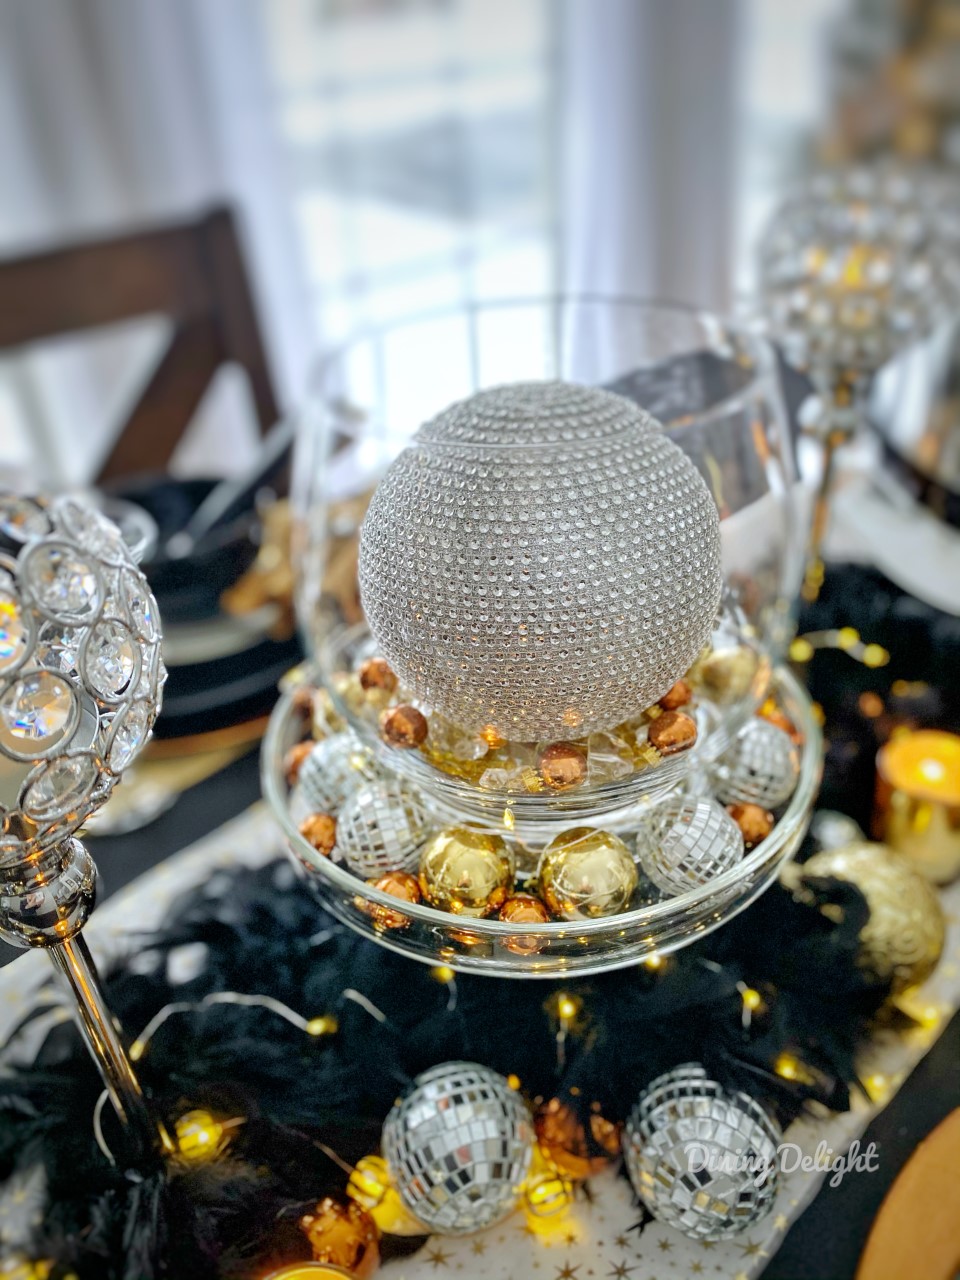 Dining Delight: New Year's Eve Tablescape with Mixed Metals